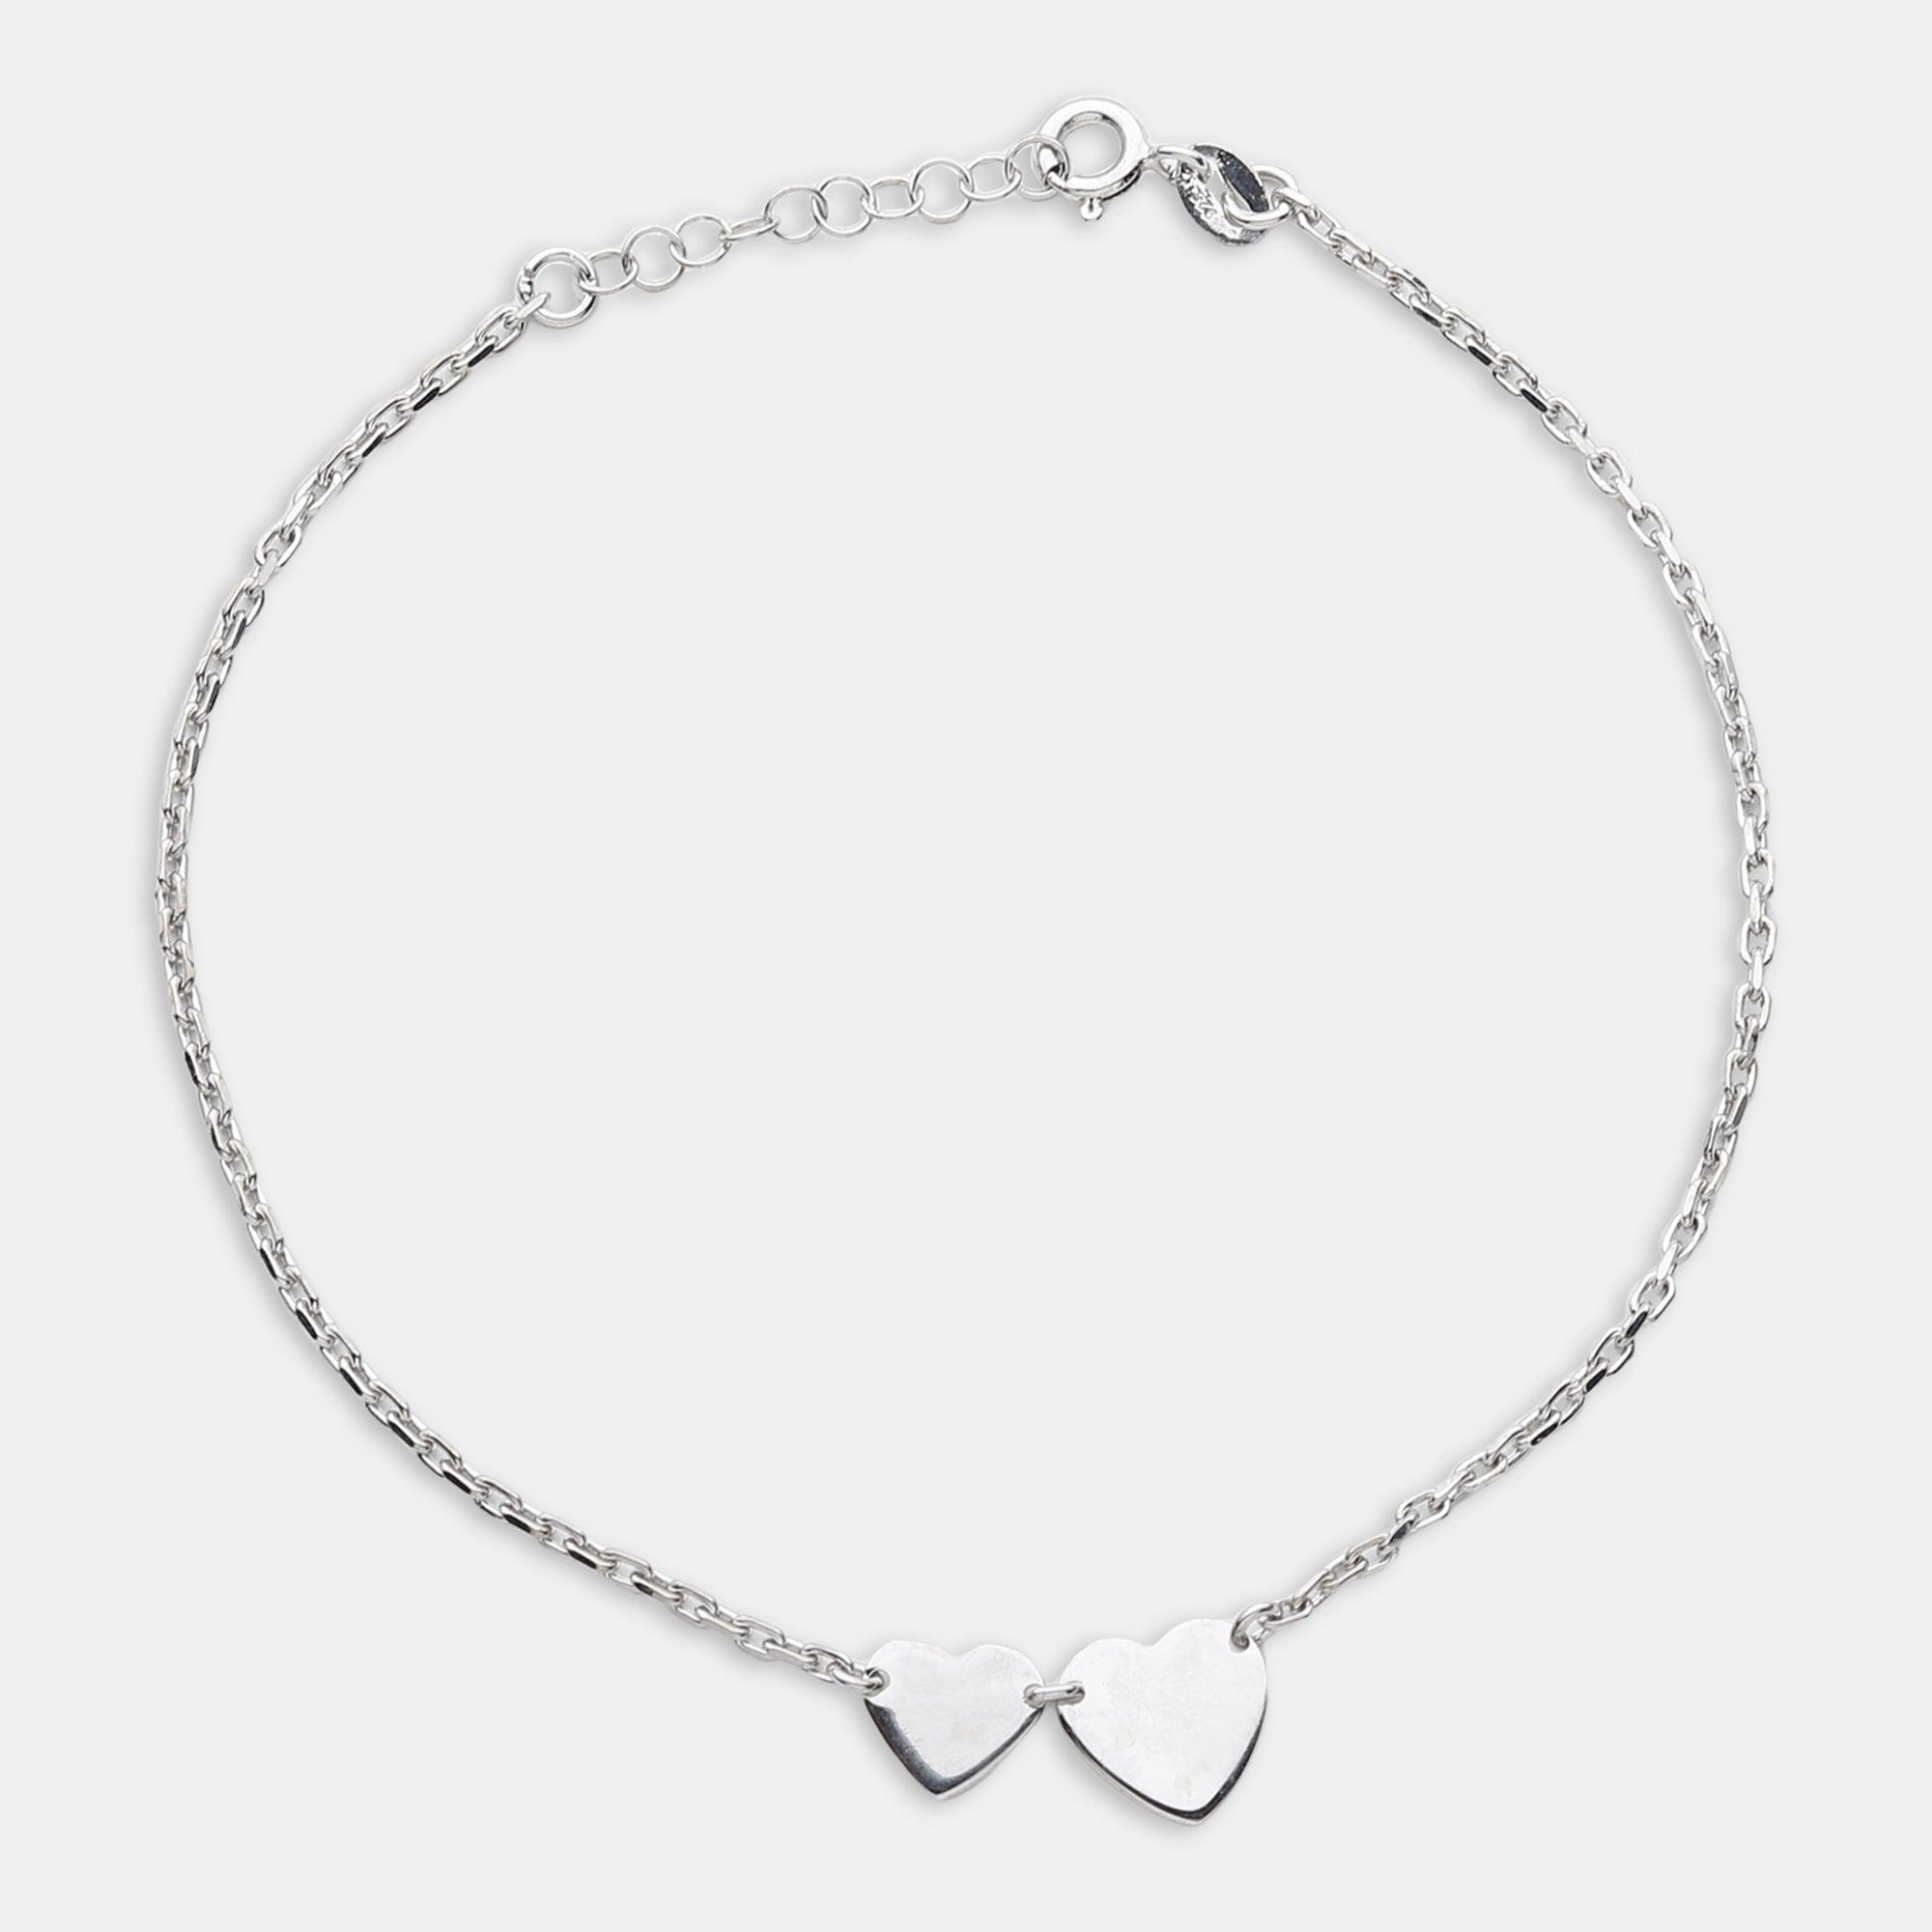 You & Me, Connecting The Hearts Anklet - silvermark